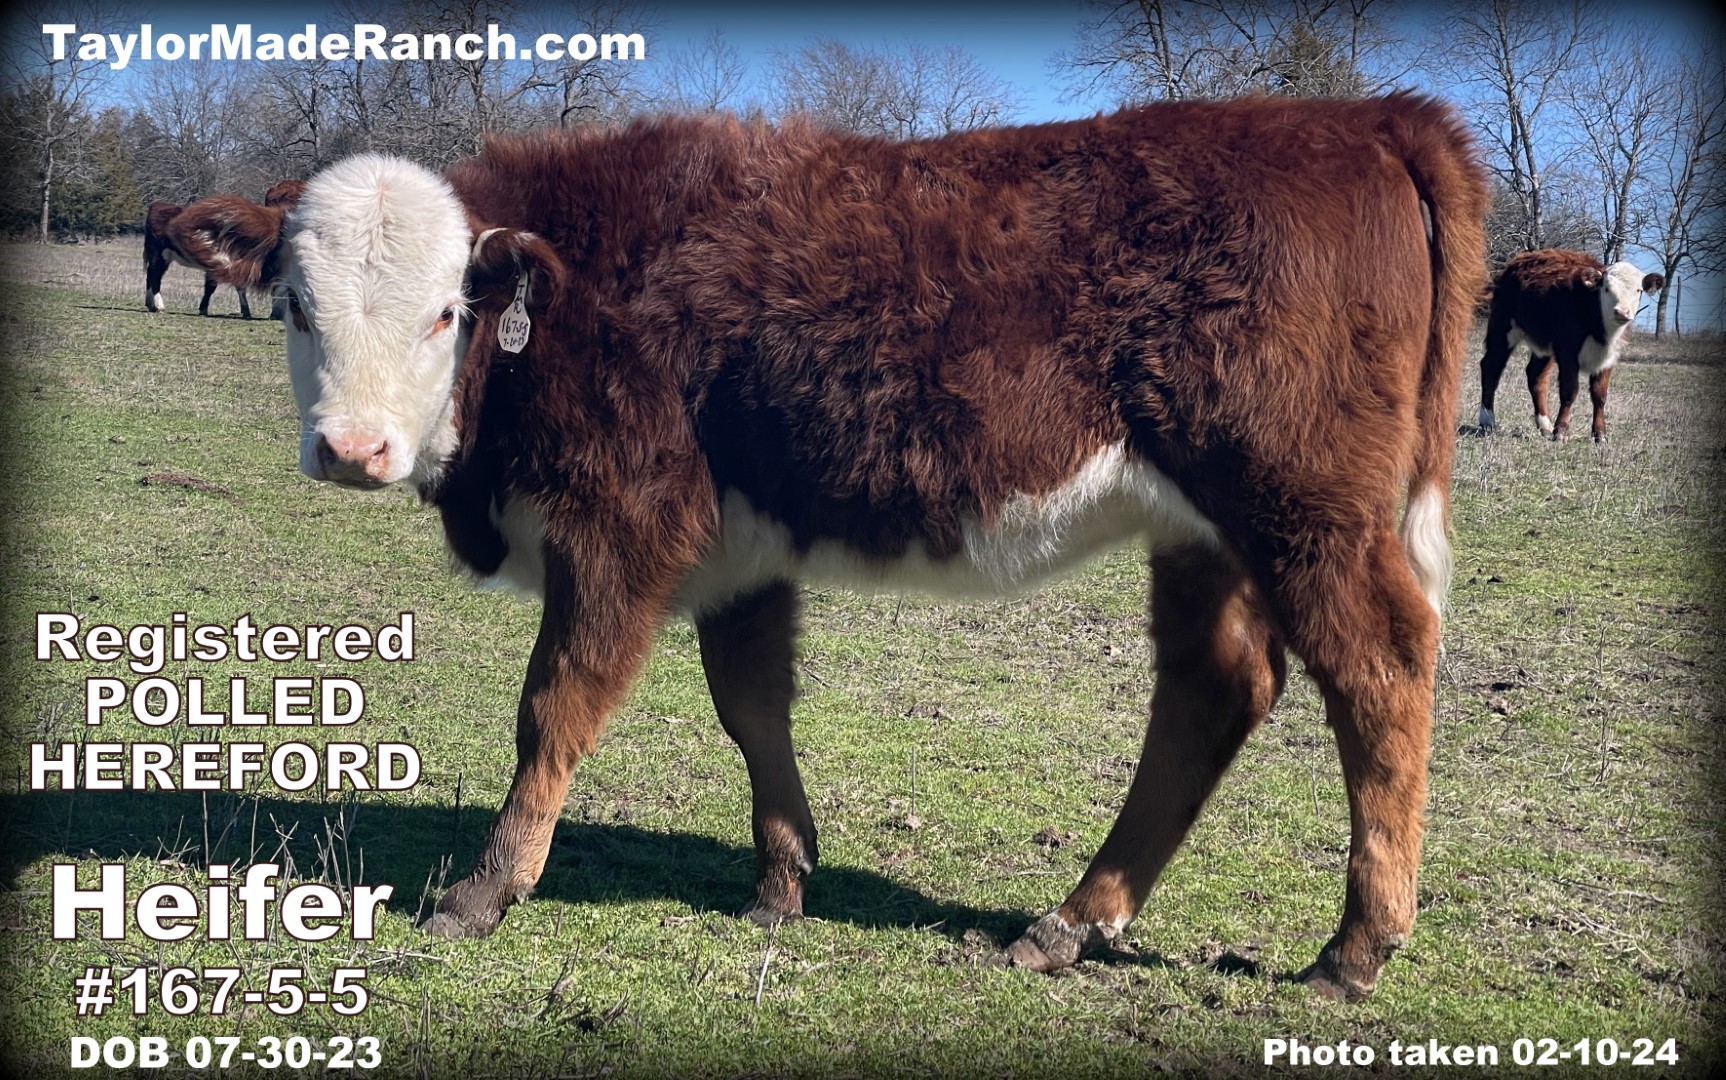 Registered Polled Hereford heifer calves for sale in Northeast Texas #TaylorMadeRanch